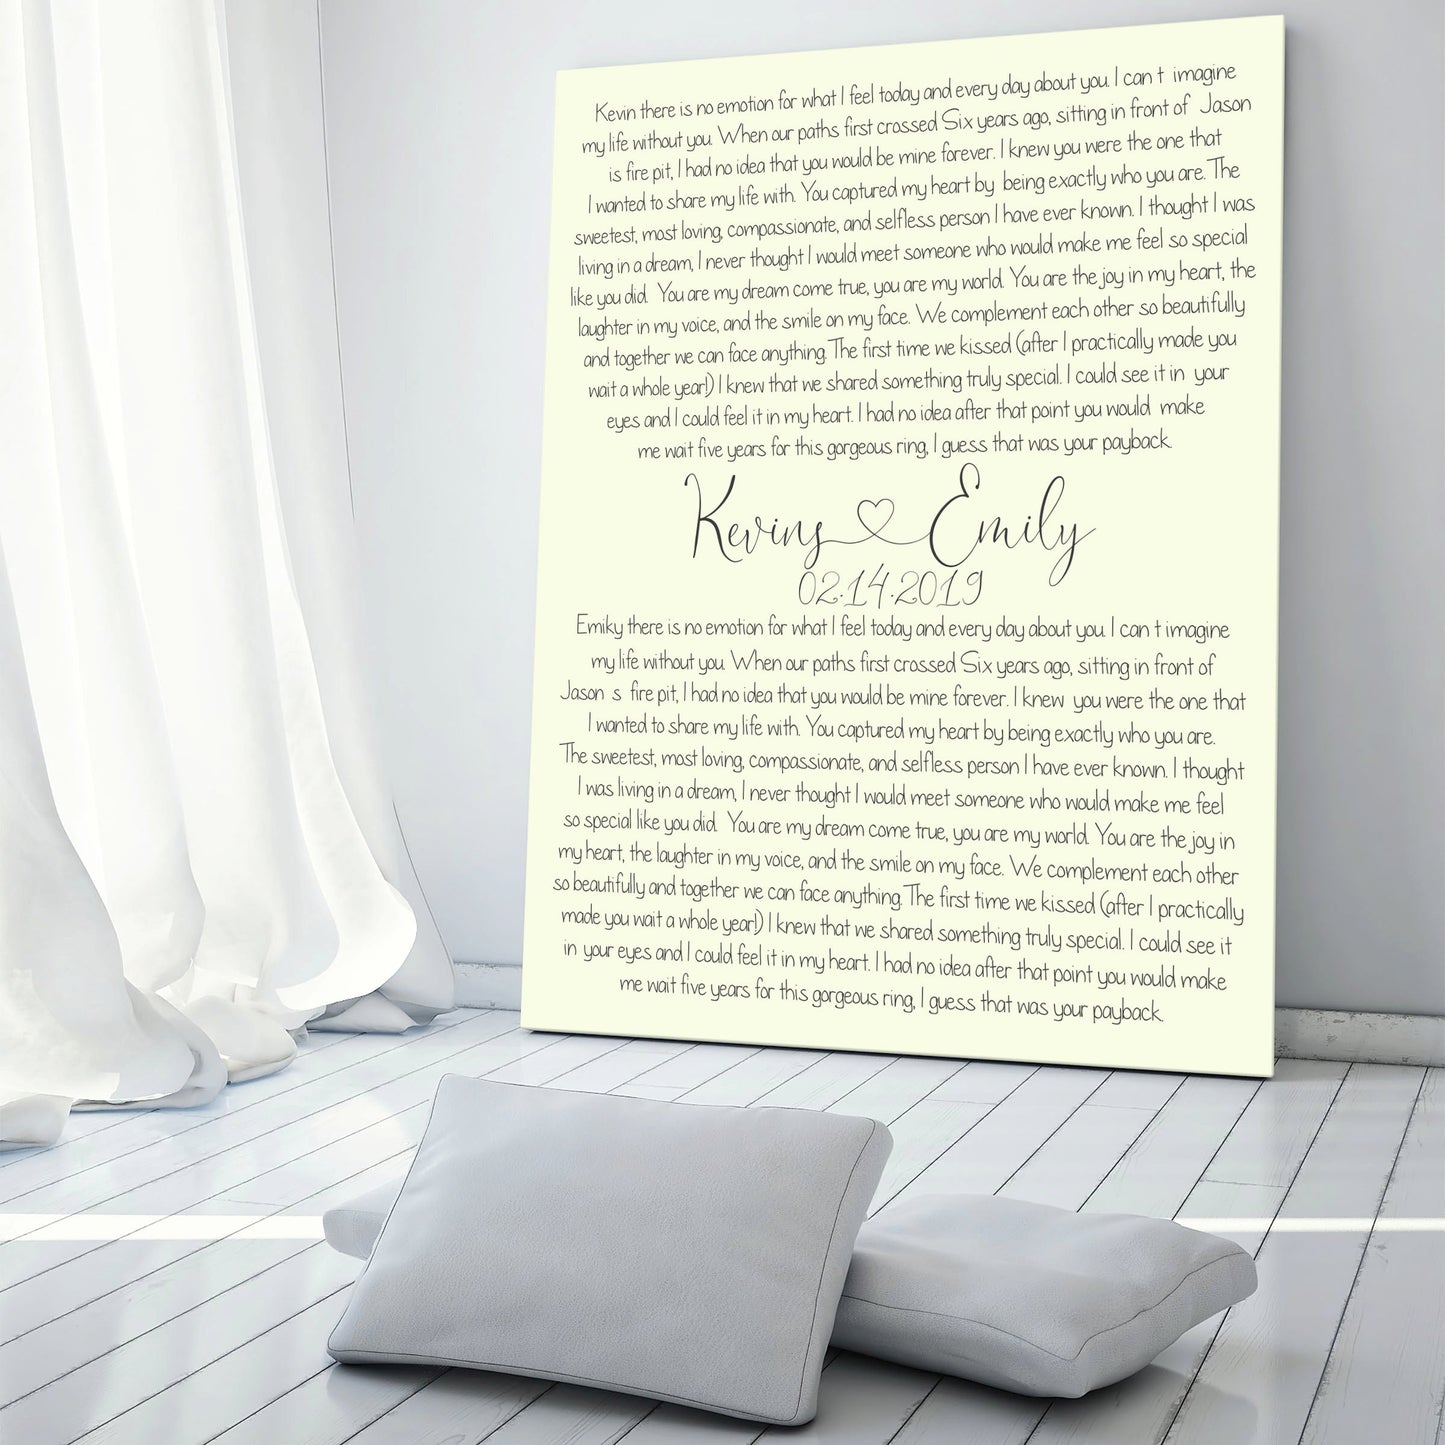 Vows on canvas, Canvas print vows, Framed vows canvas, Custom wall canvas, Canvas sign with vows, Anniversary gift, Christmas gift